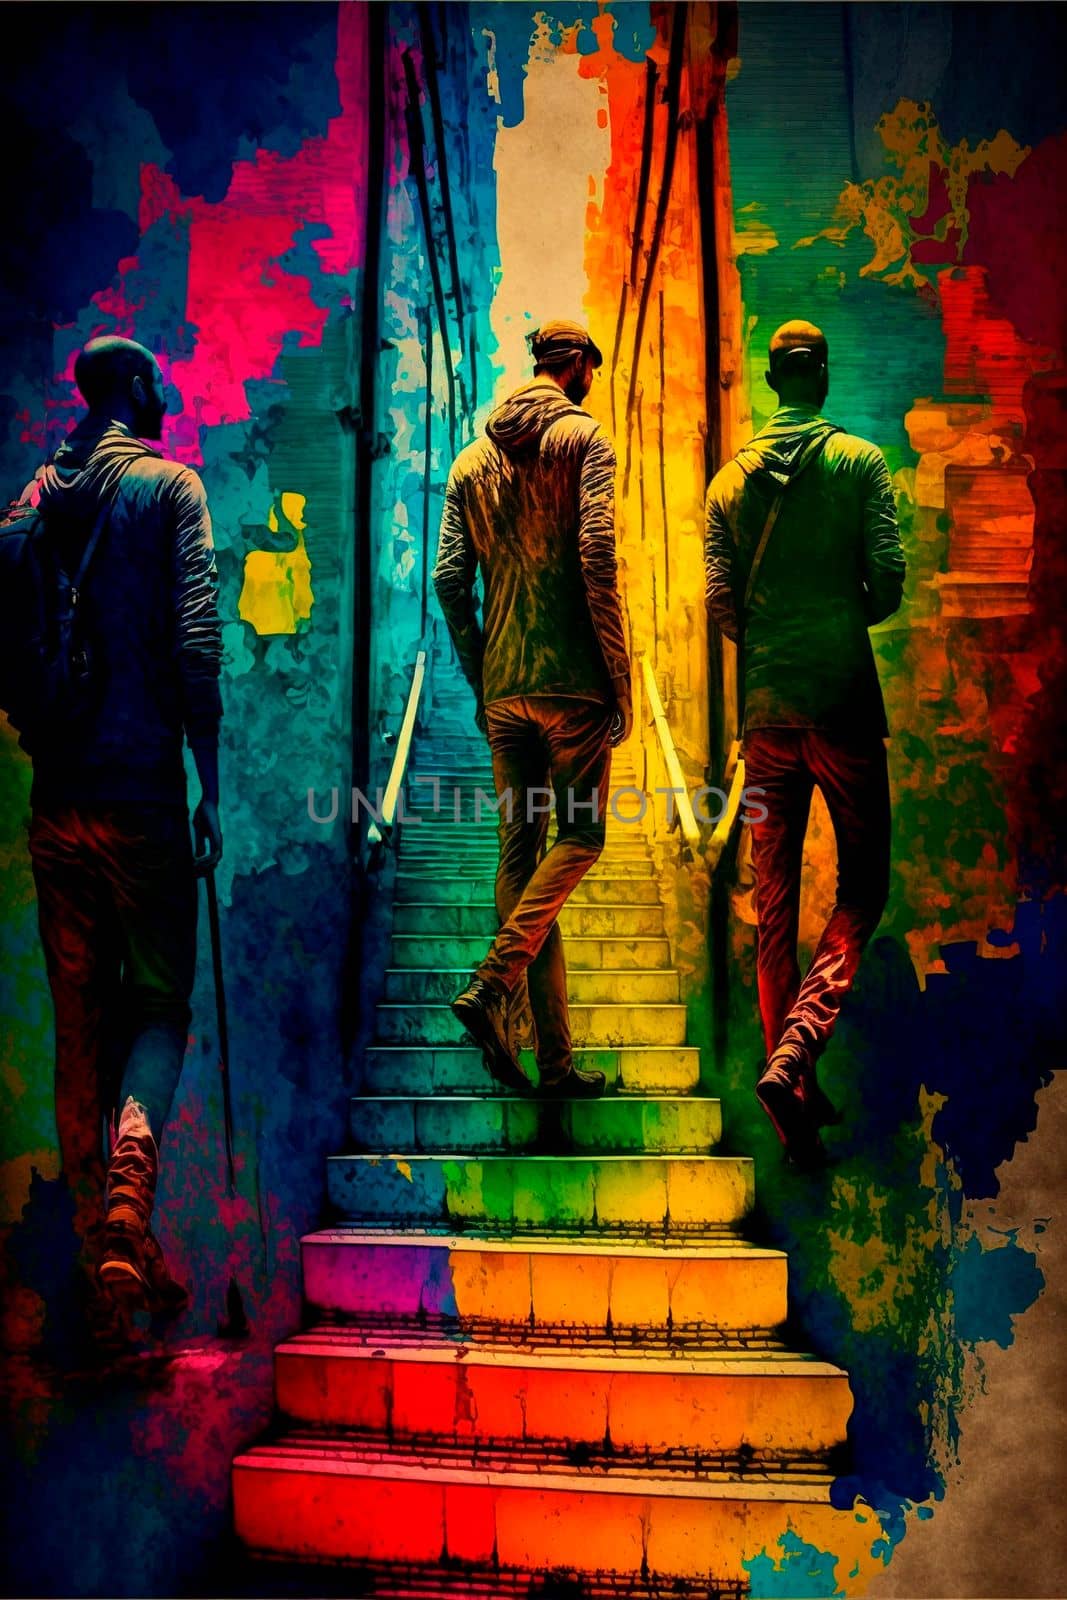 gangster and his friends Climbing stairs, psychedelic colors, finding yourself. High quality illustration